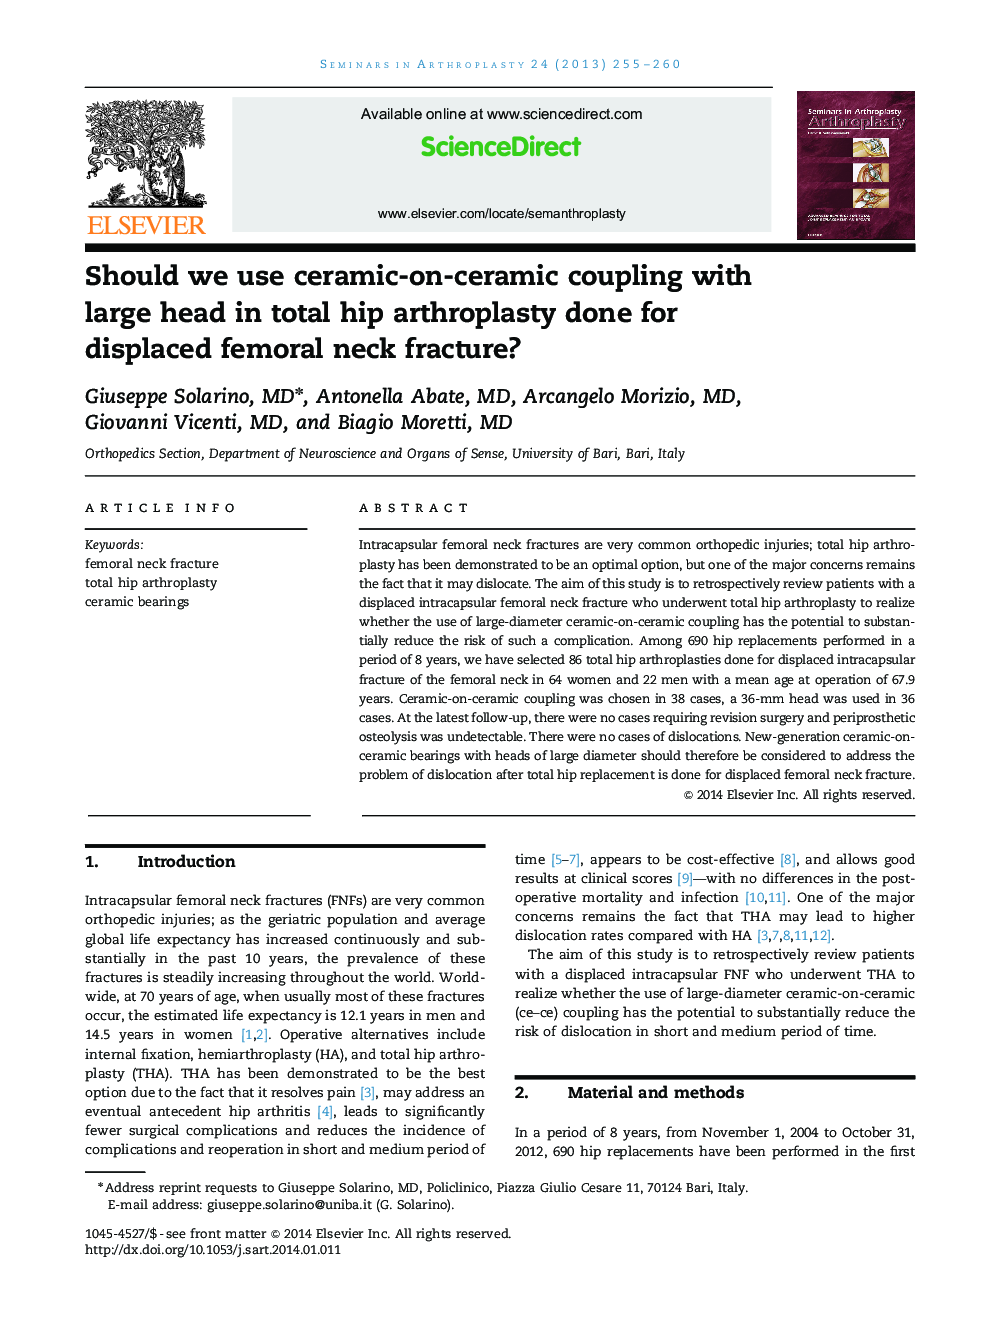 Should we use ceramic-on-ceramic coupling with large head in total hip arthroplasty done for displaced femoral neck fracture?